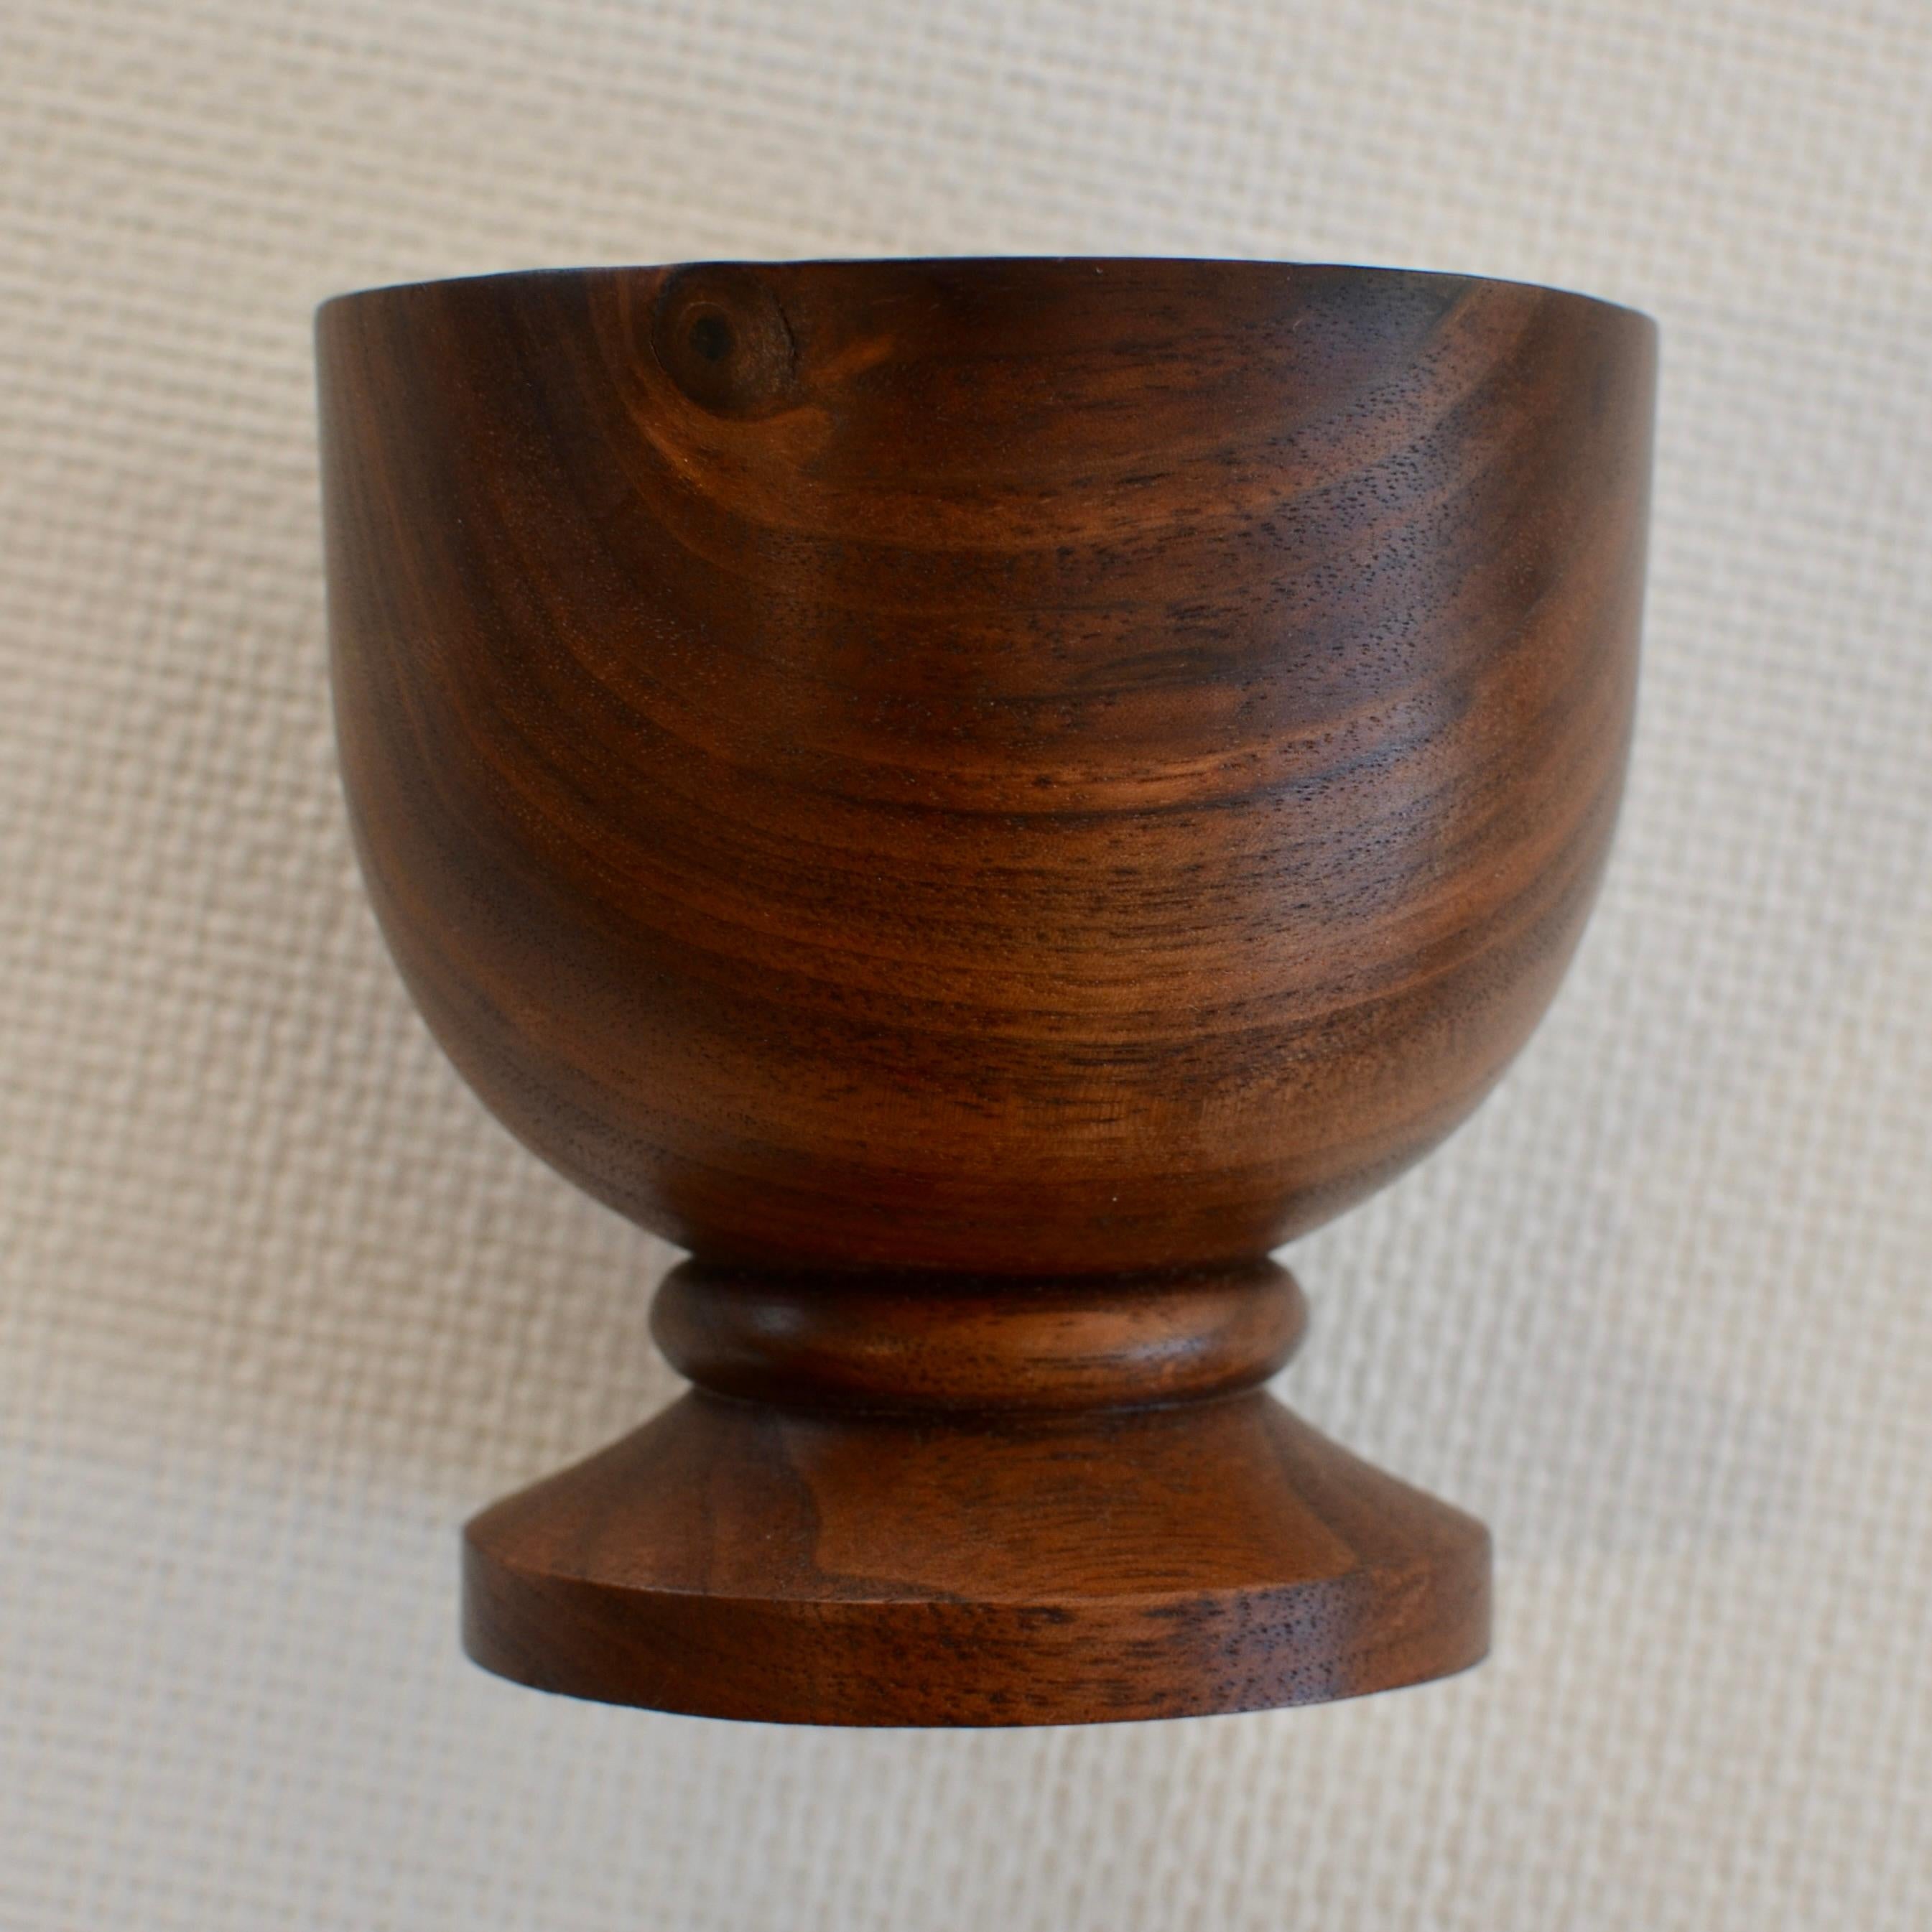 Hand-carved walnut goblet. Created using wood only from fallen walnut trees. One of a kind.